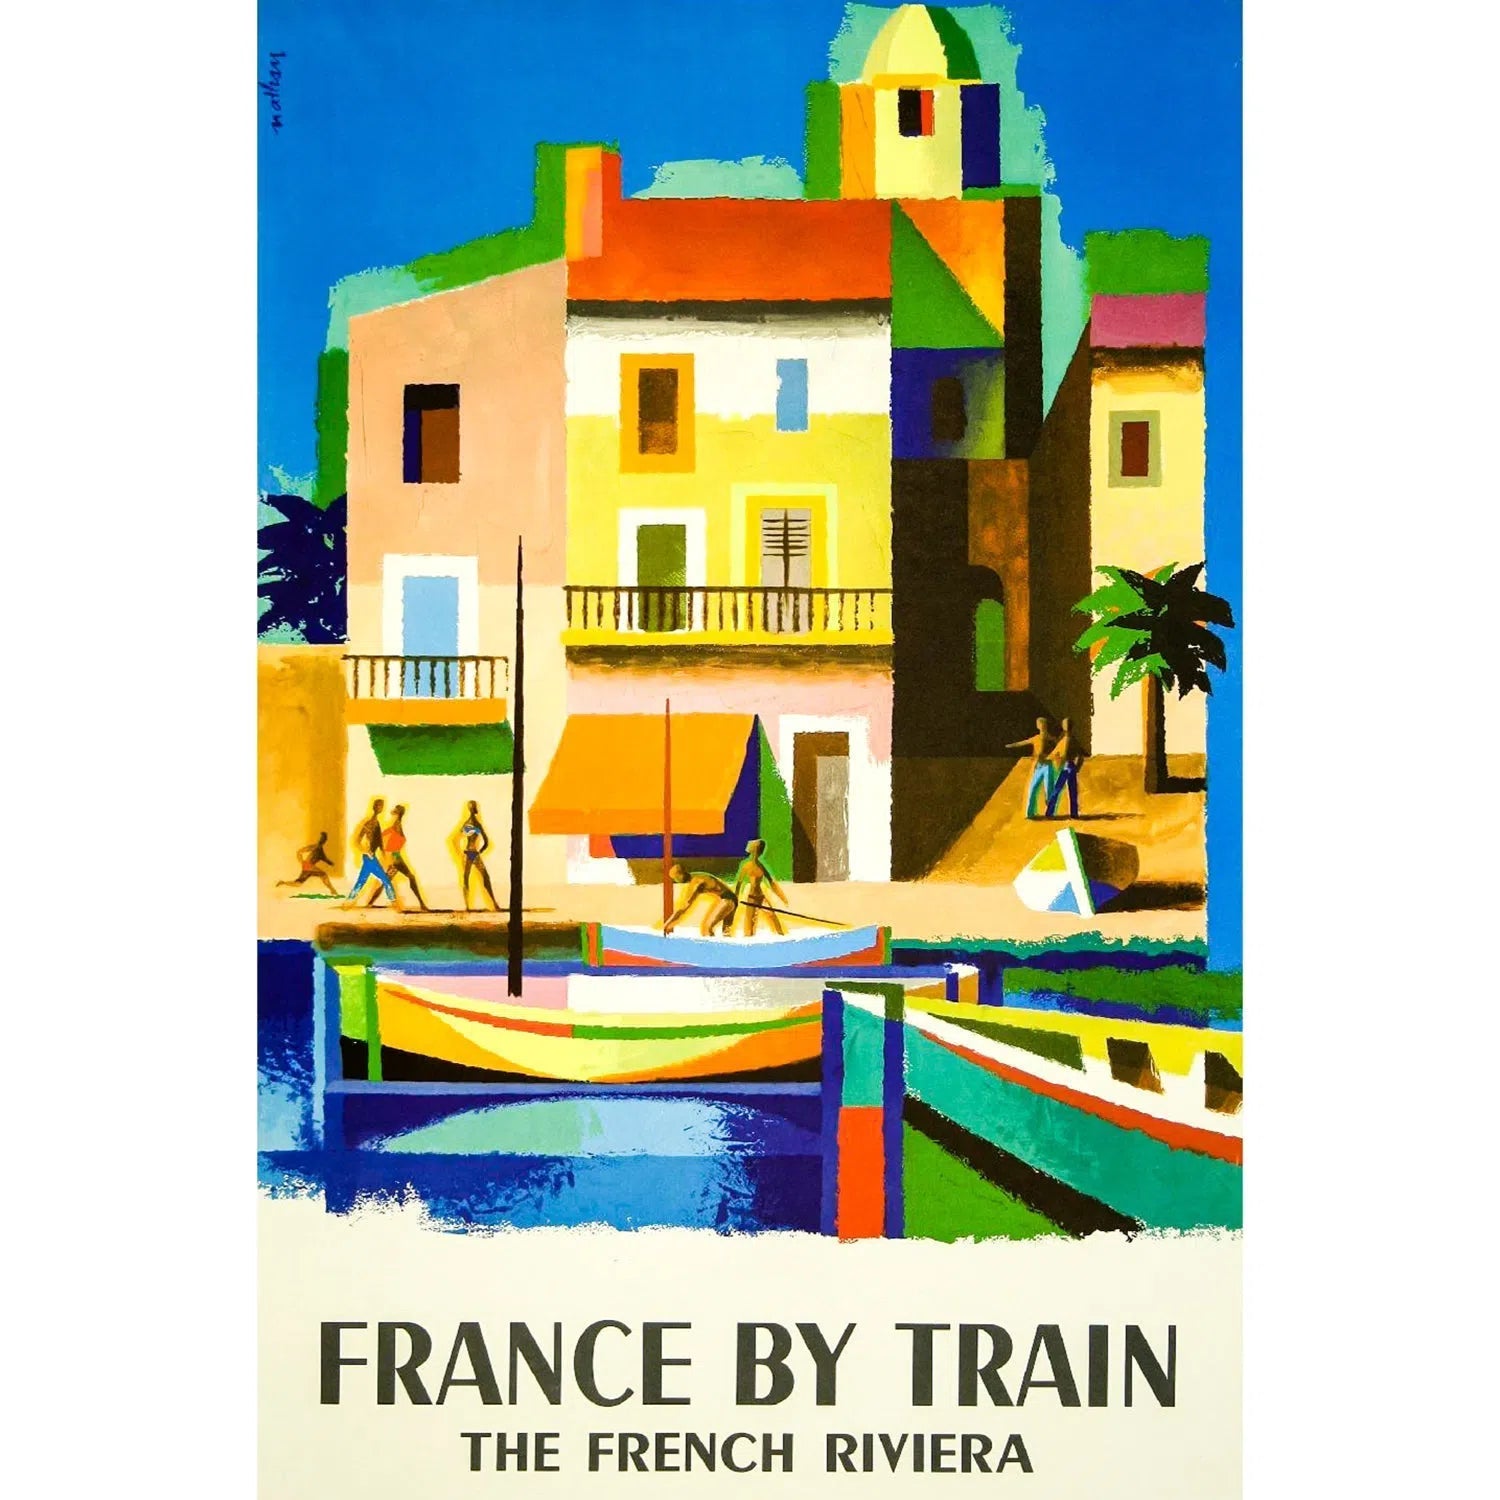 France by train - French Riviera-Imagesdartistes